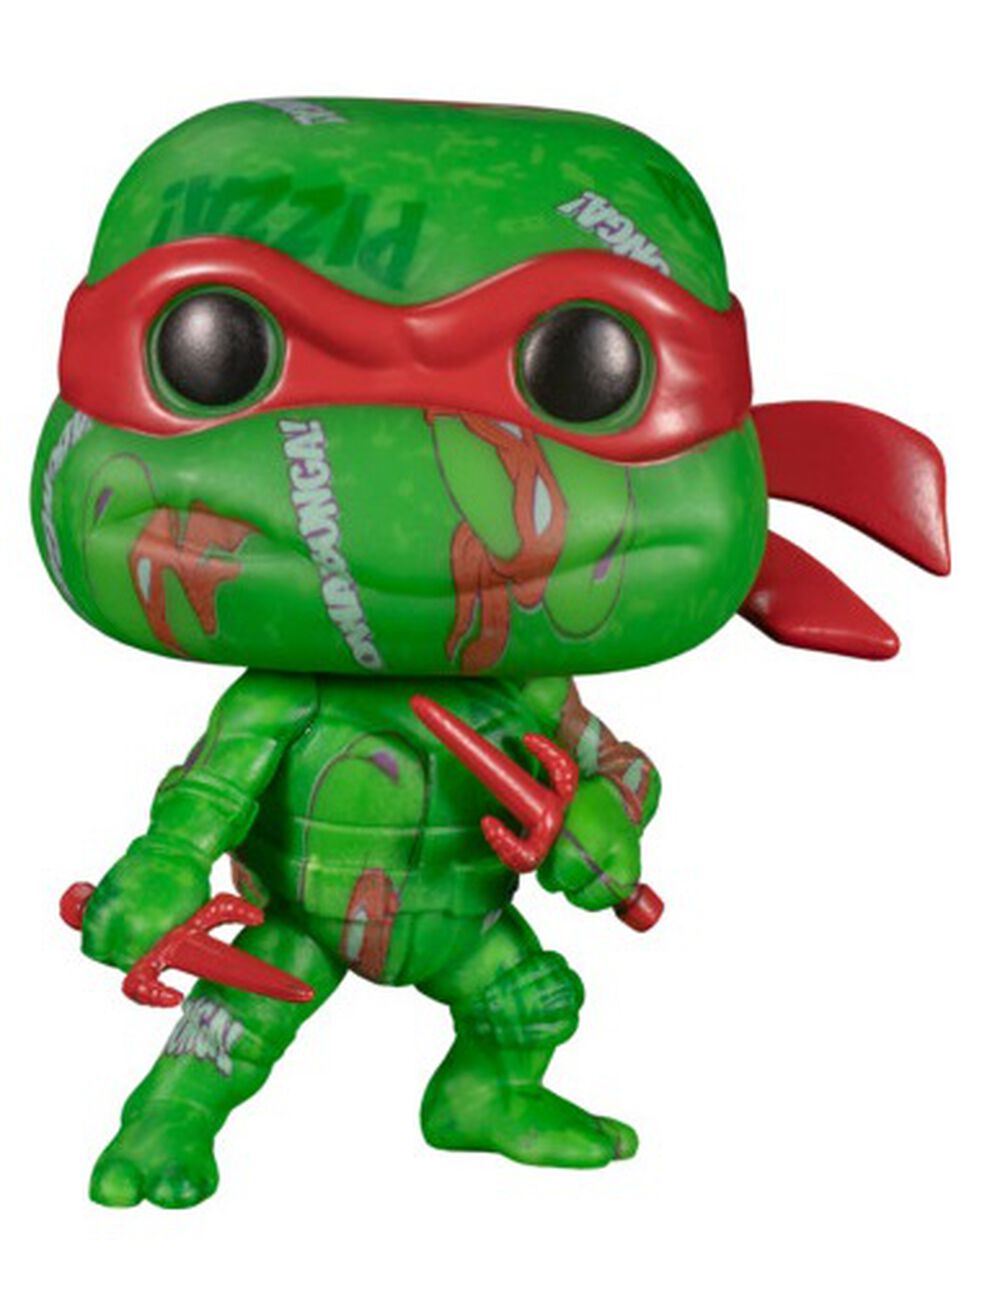 Figurine Raphael Artist With Pop Protector / Les Tortues Ninja / Funko Pop  Animation 57 / Exclusive Special Edition